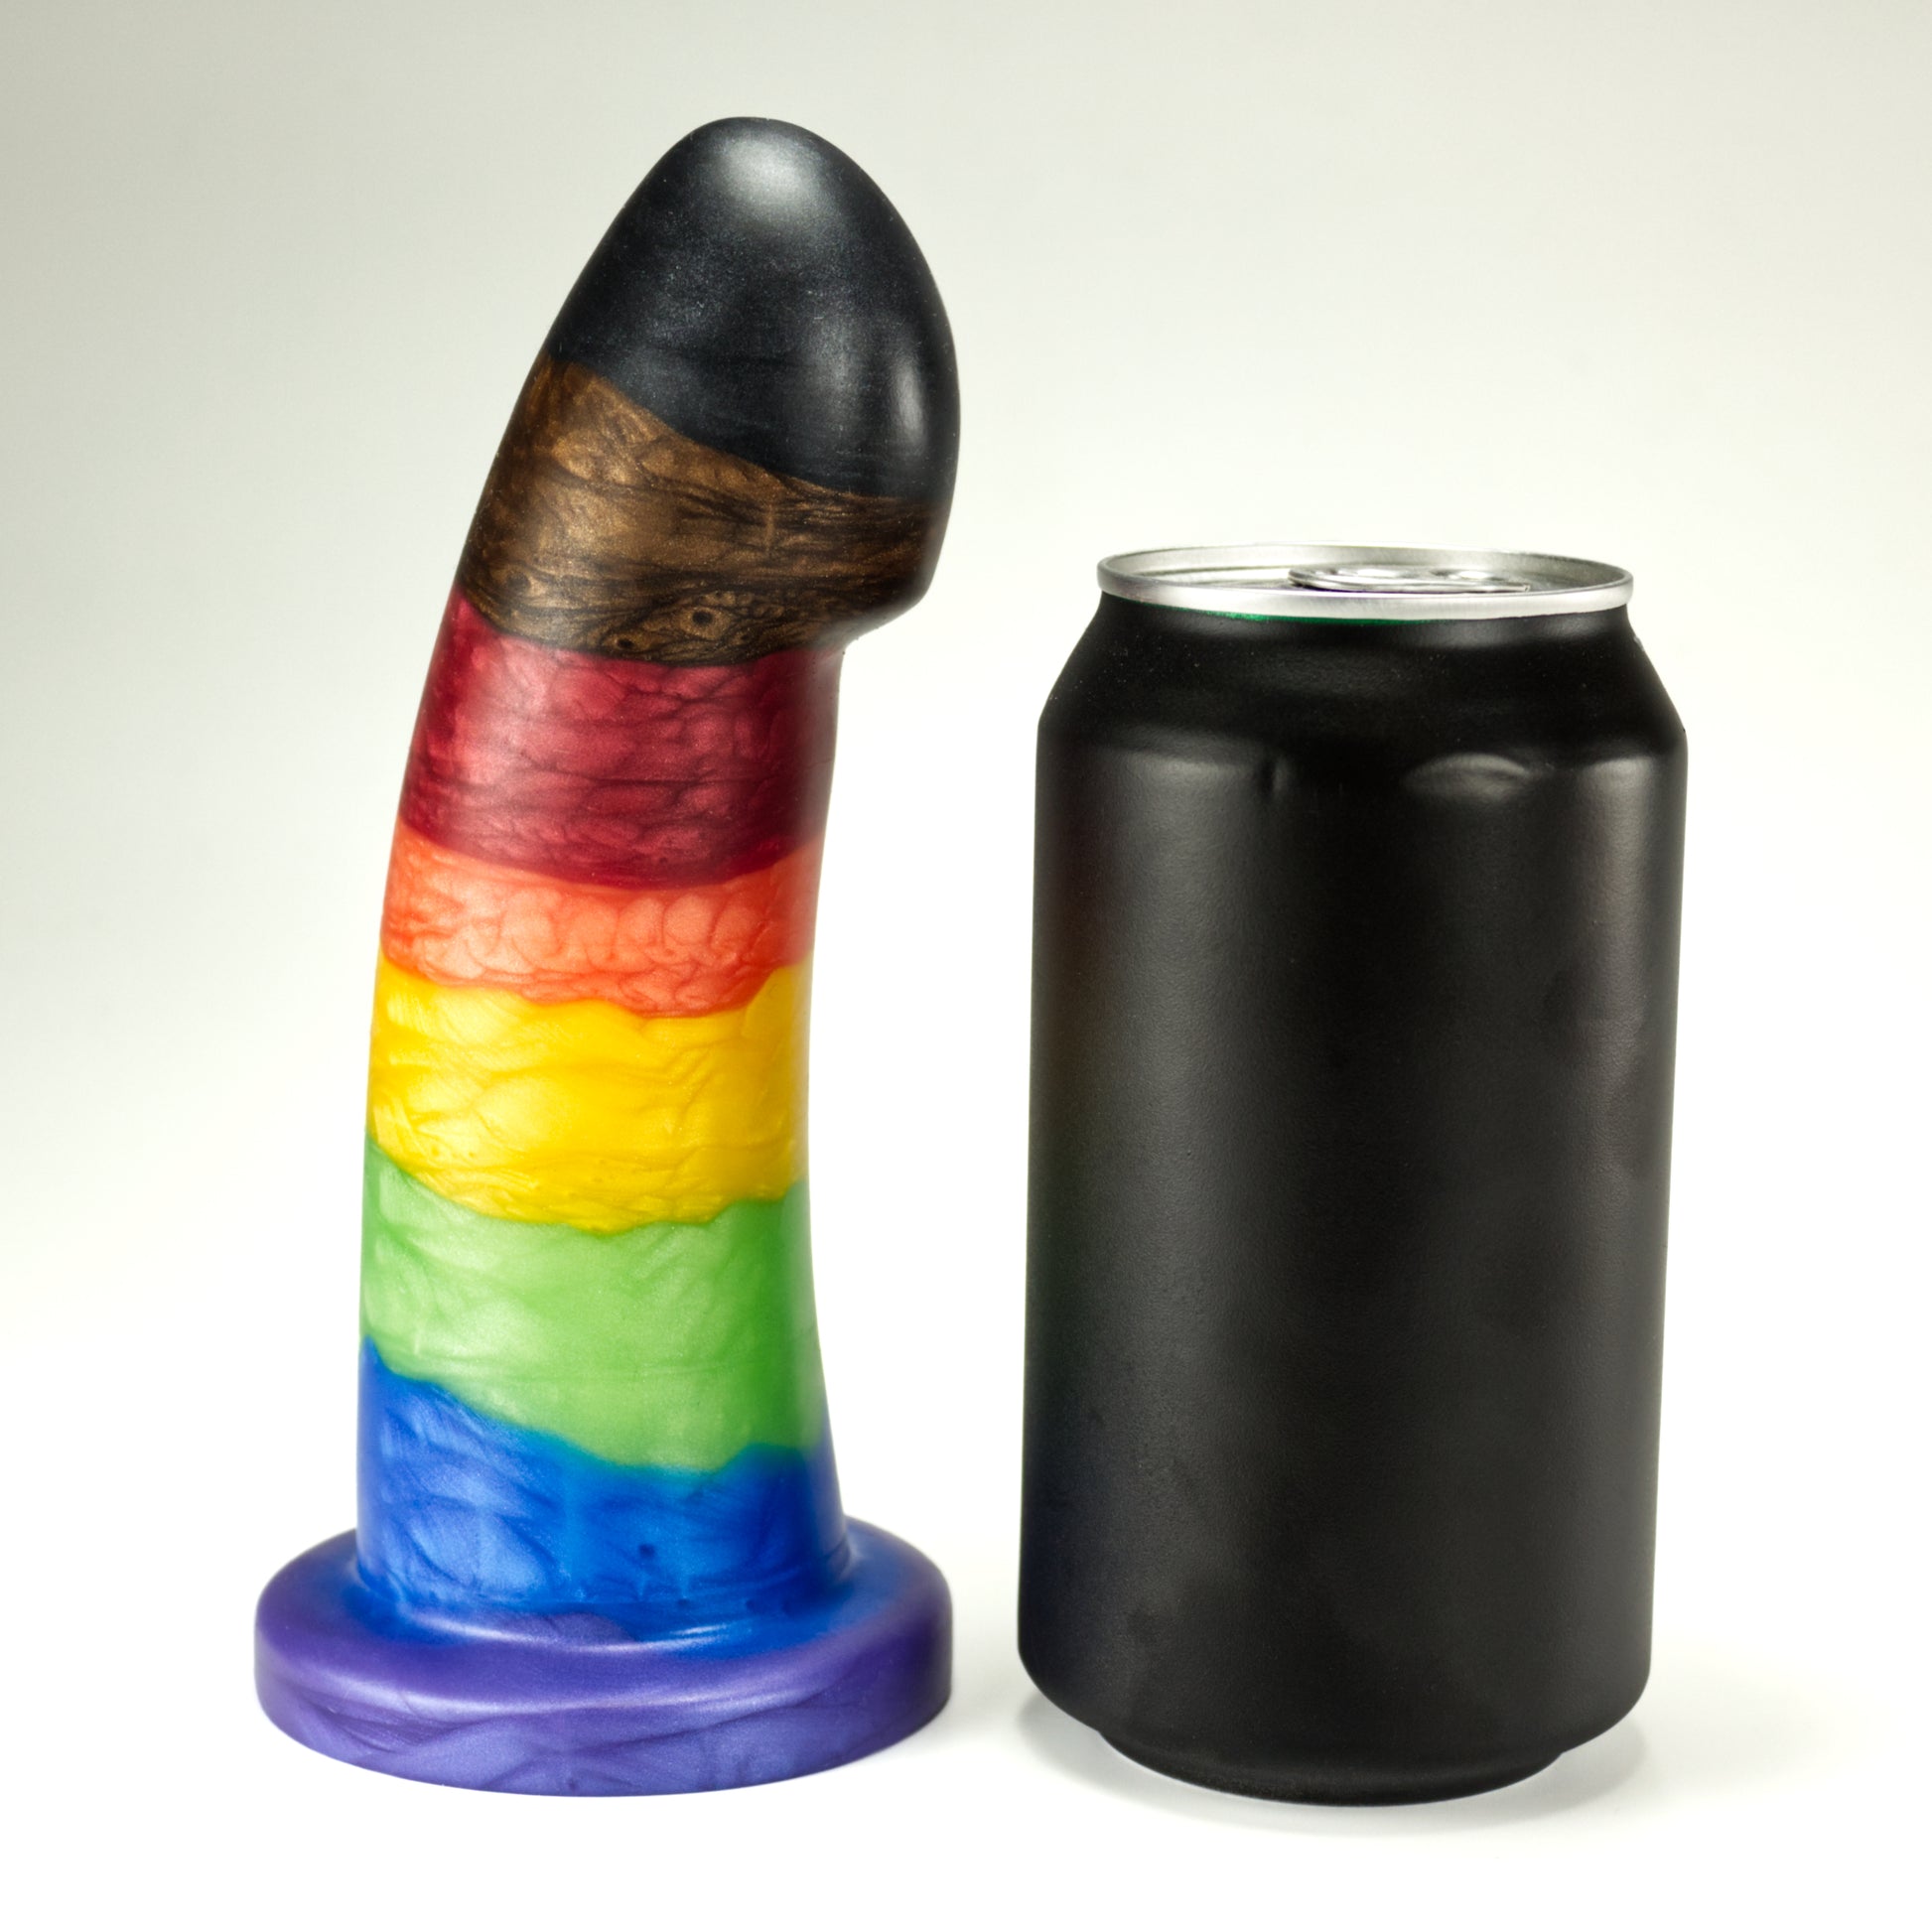 Side view of the Sidekick Large next to a standard soda can, showing that the dildo is a little taller and about three quarters of the width of the can.